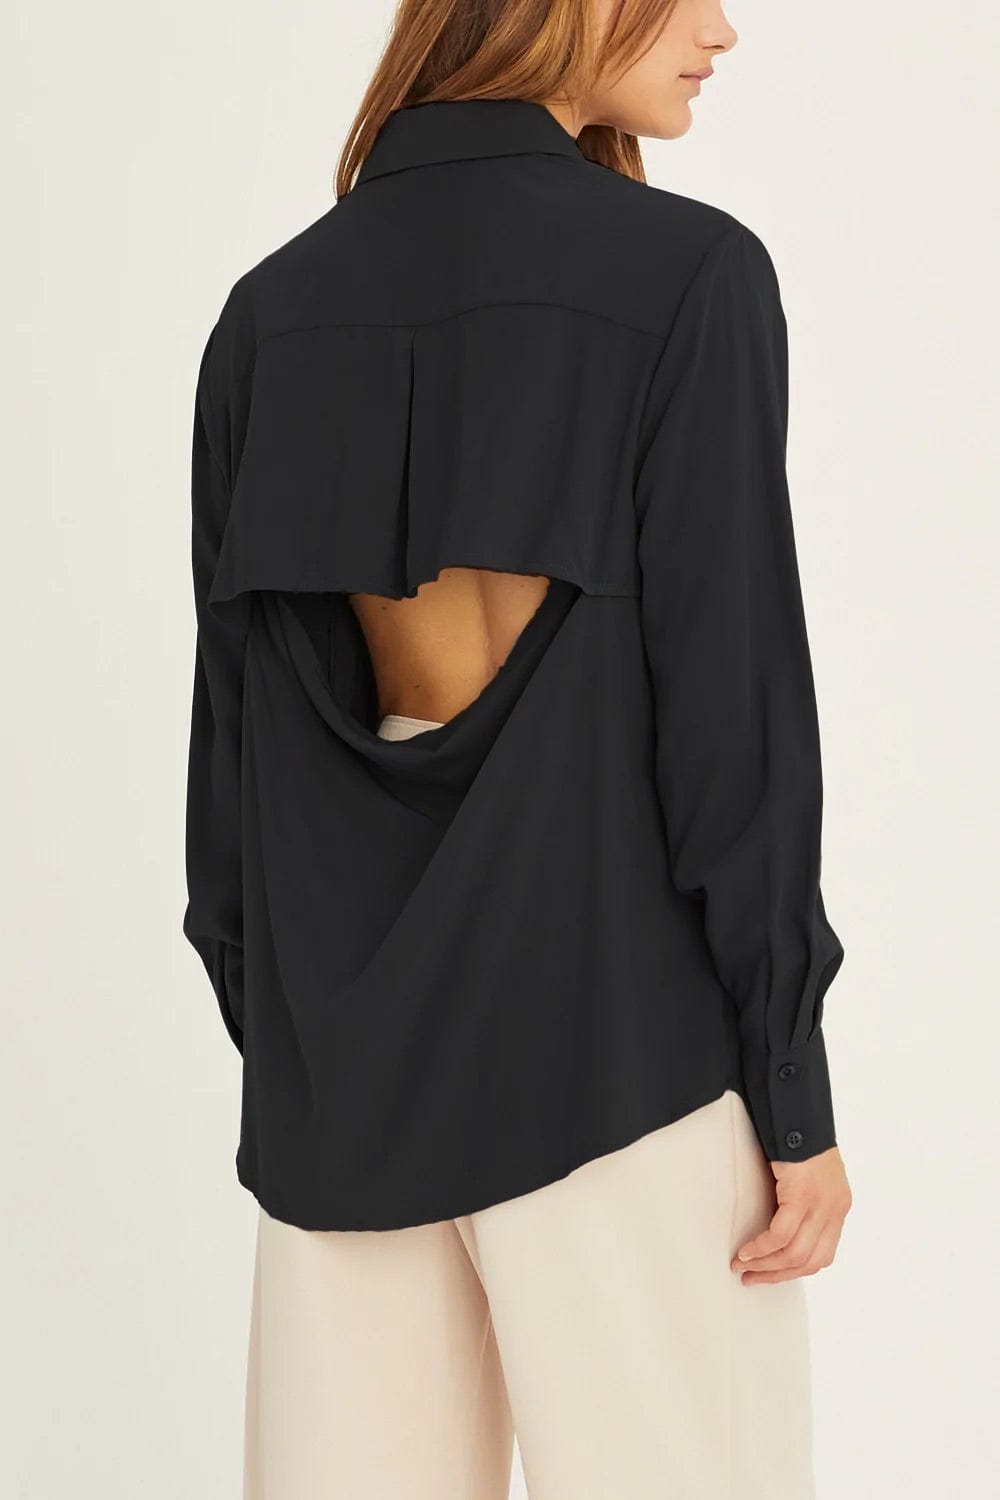 Sianna Classic Button Up Open Back Shirt in Black - Shirts &amp; Tops - Blooming Daily